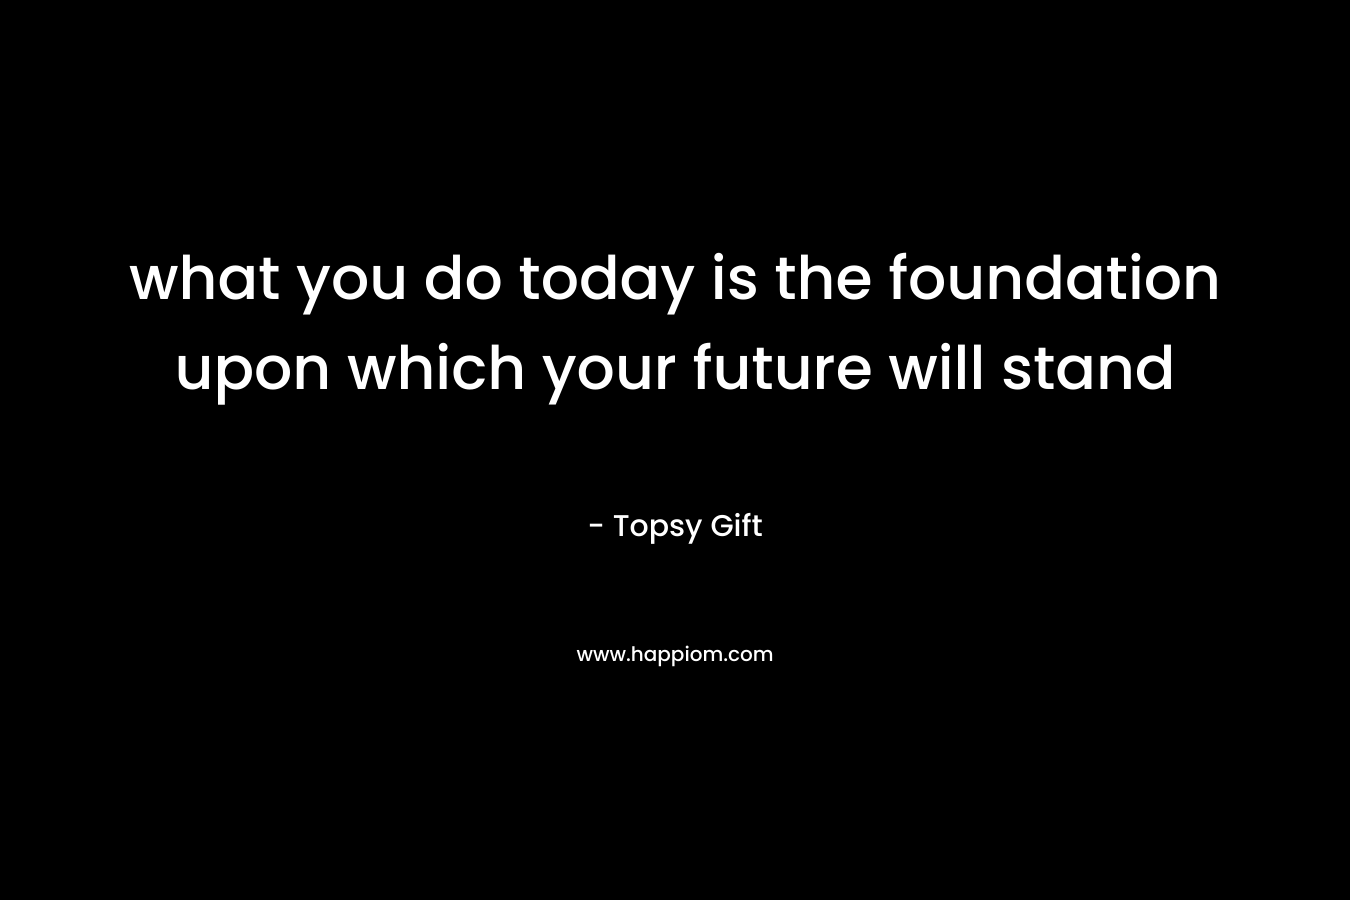 what you do today is the foundation upon which your future will stand